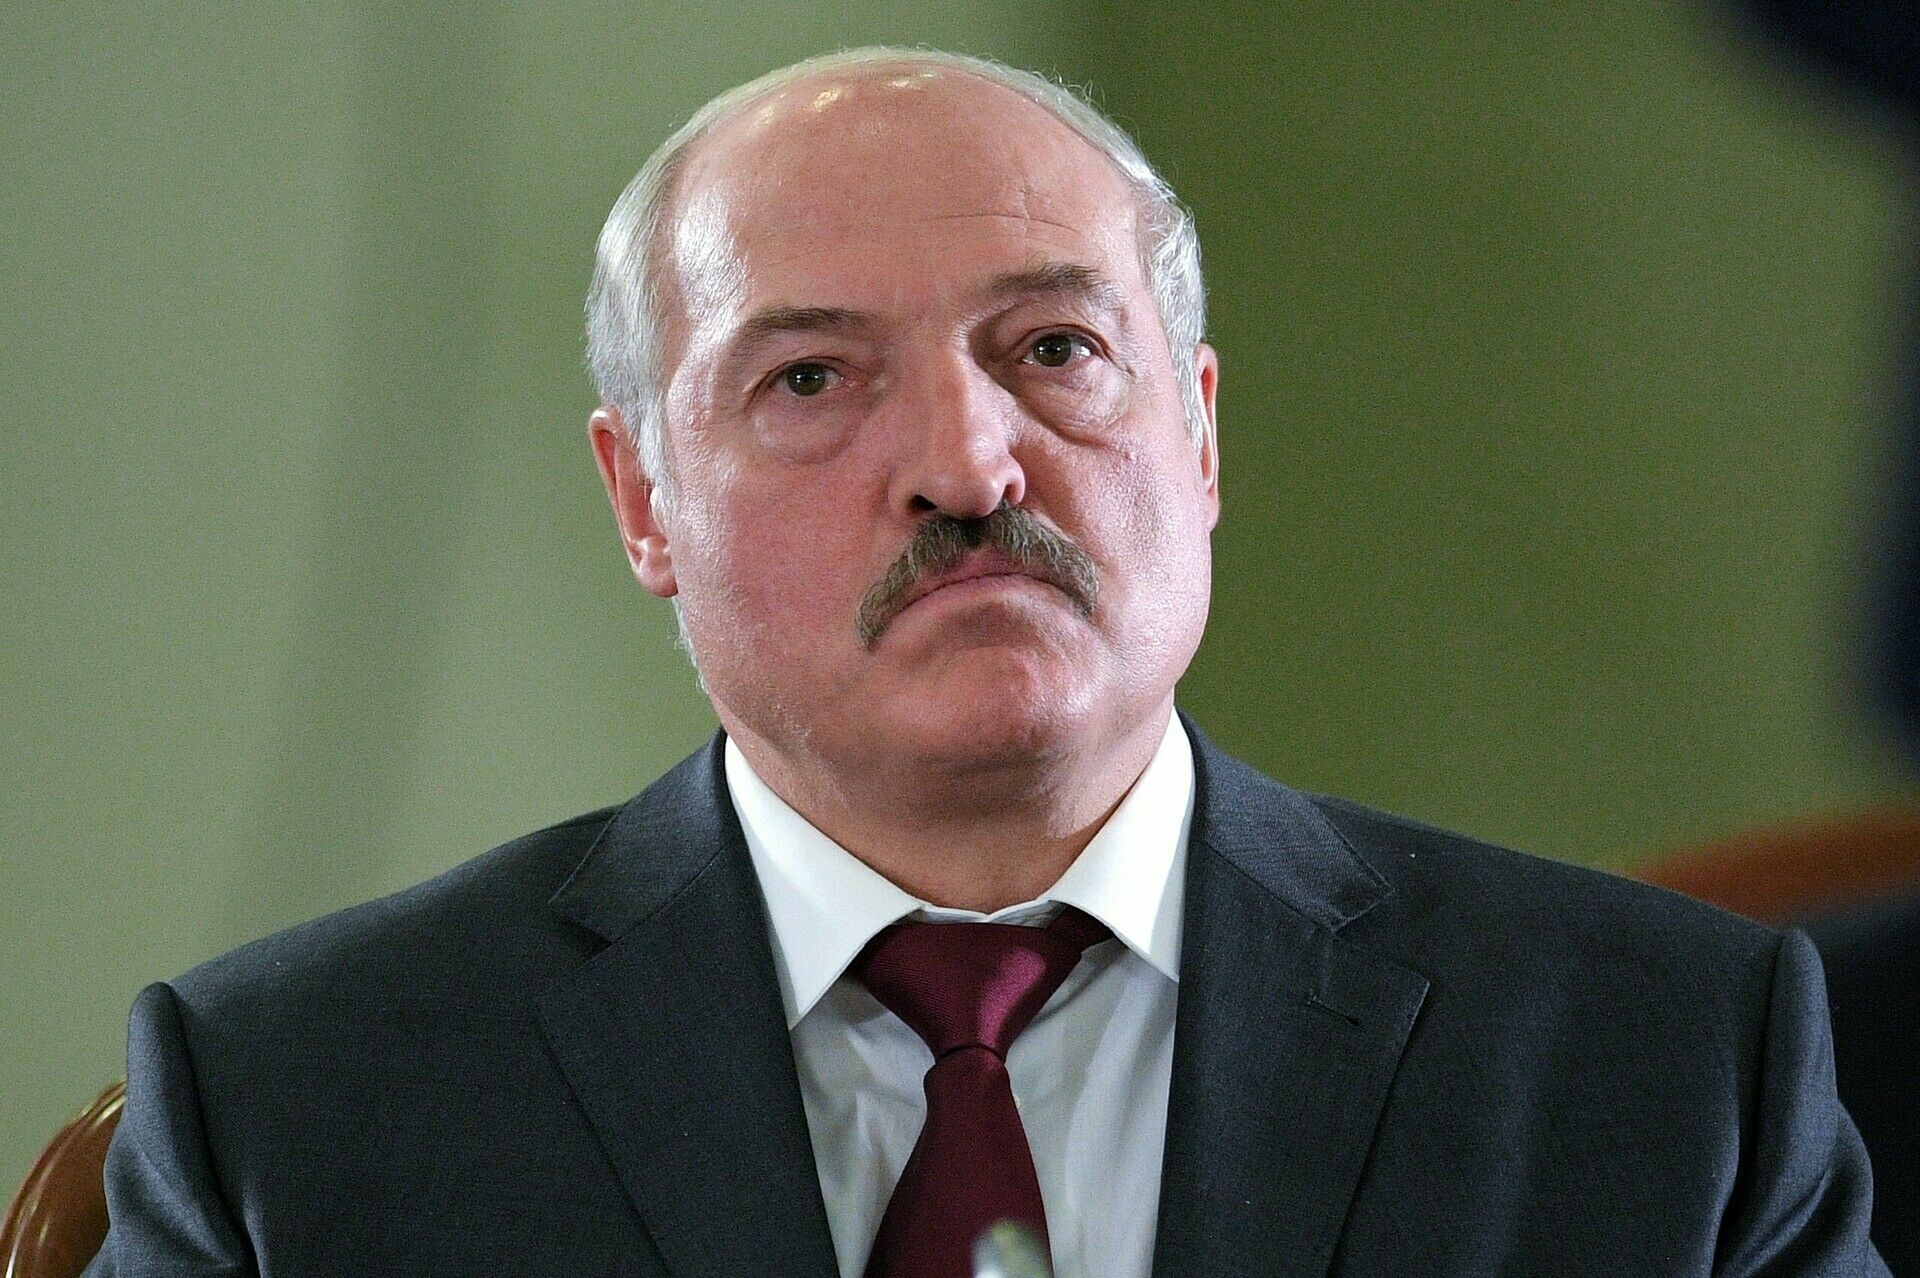 "Not for that people did  choose me": Lukashenko announced that he would not give up power